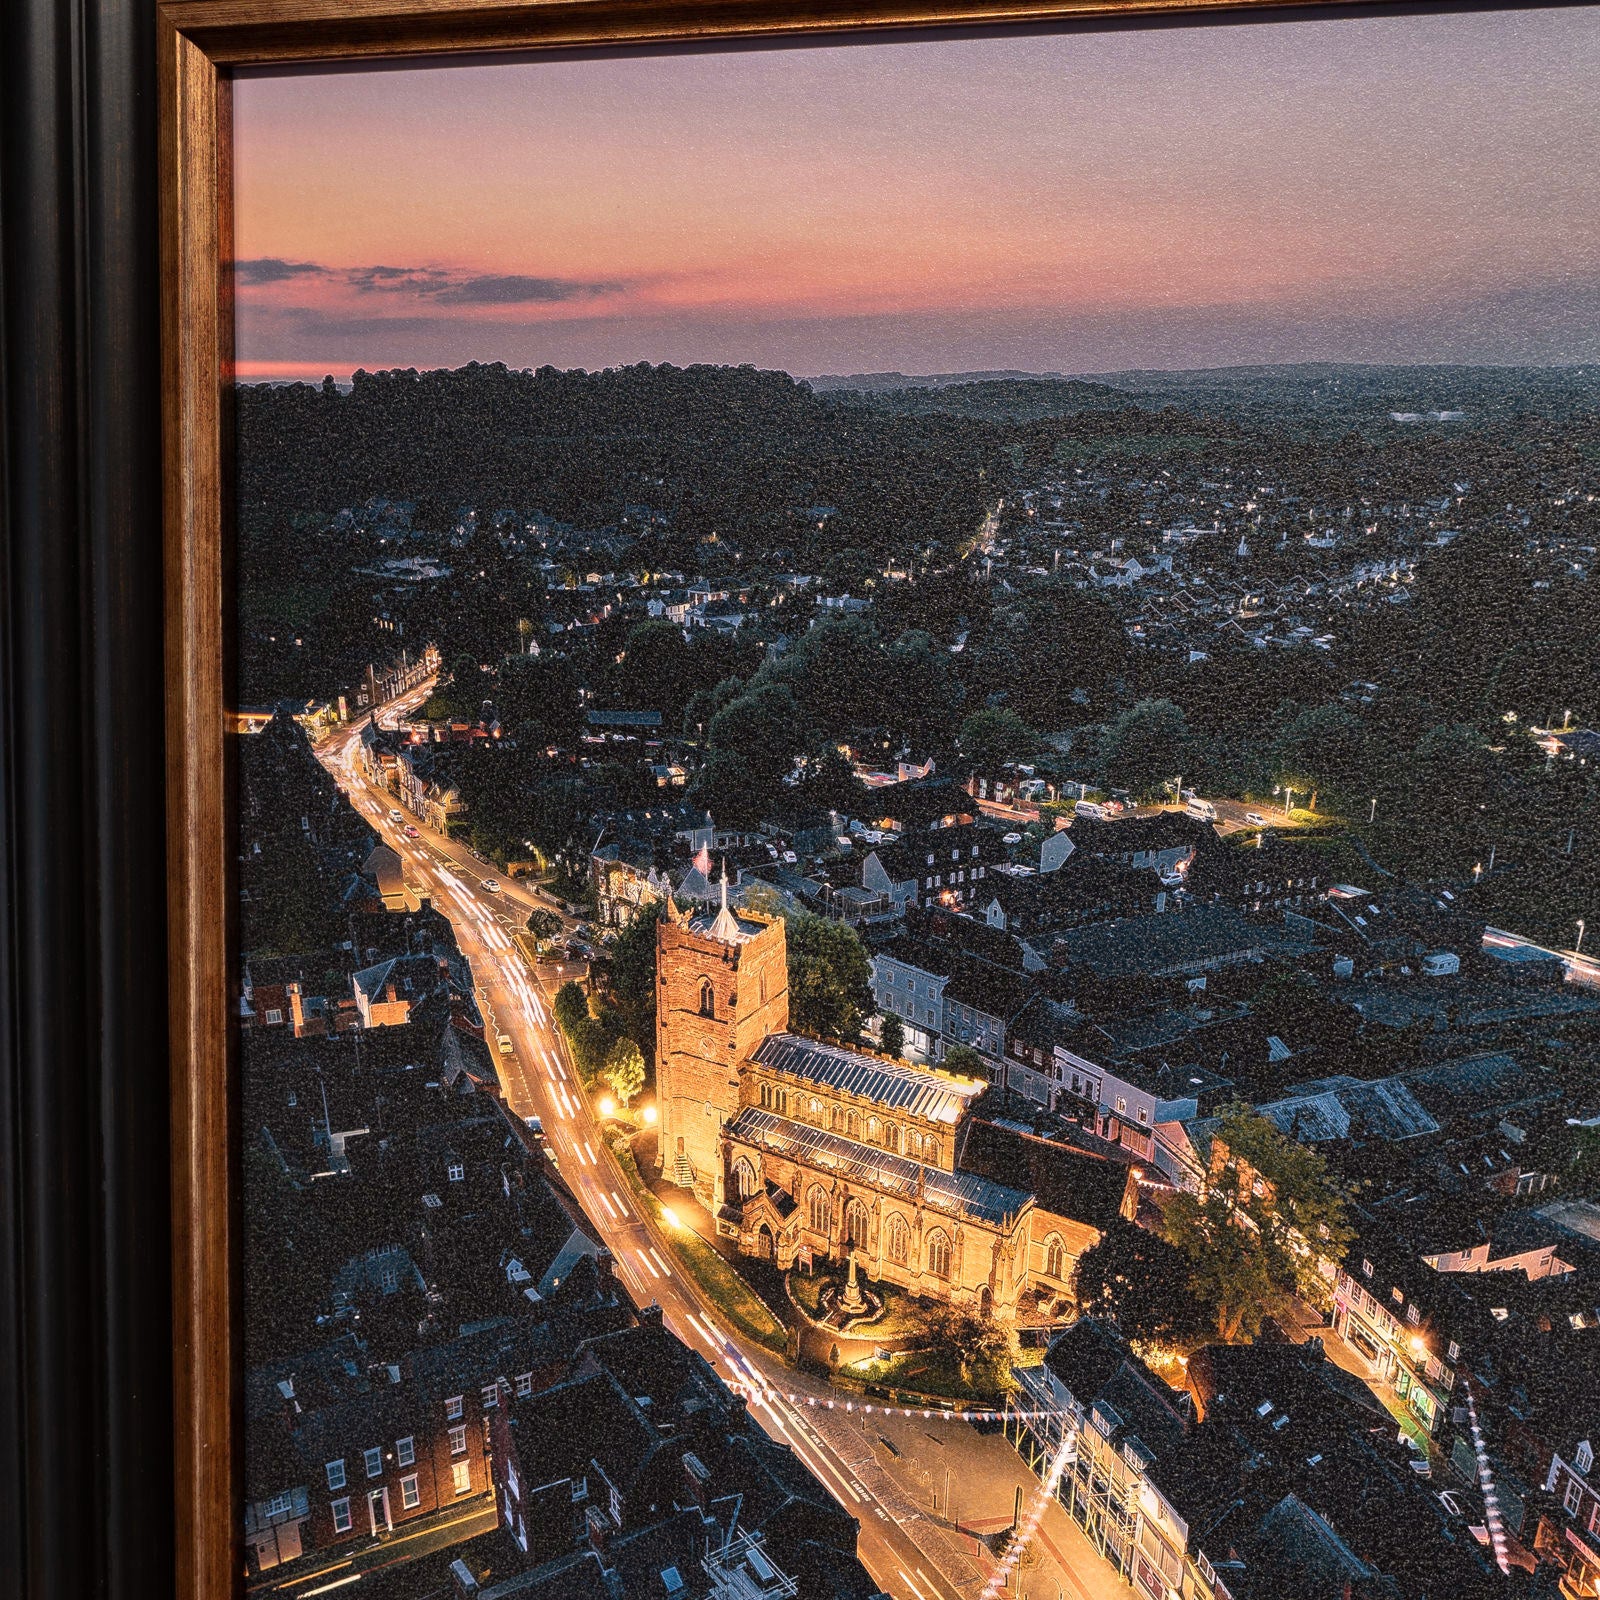 St Nicholas church Newport, sunset, drone photo framed in black and gold